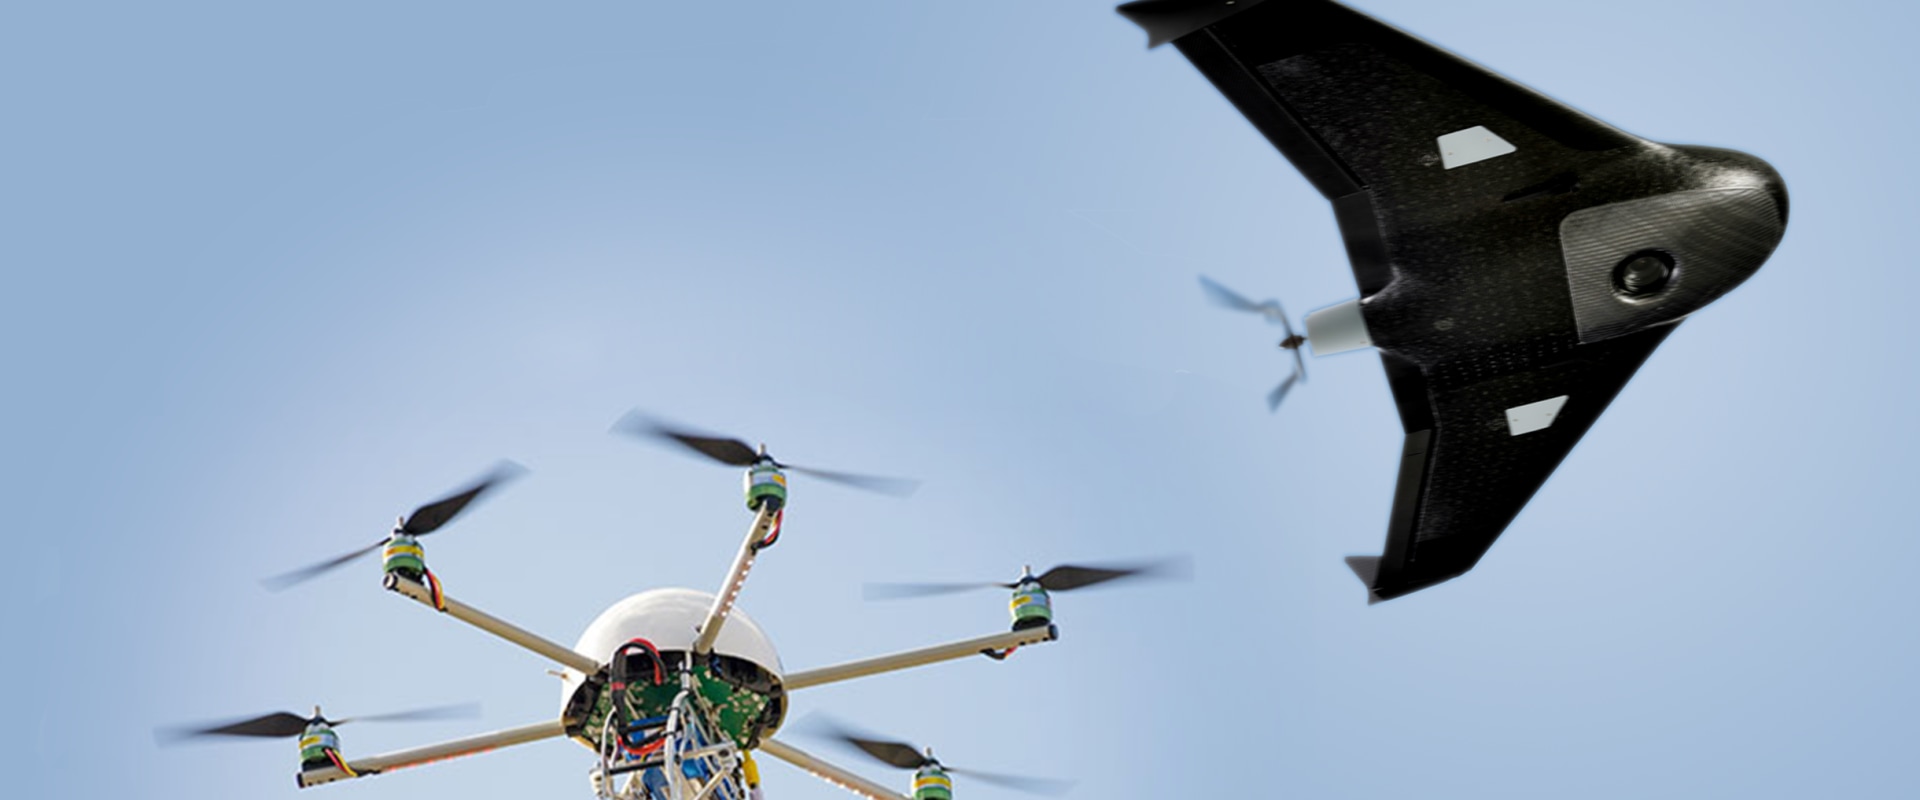 Multi-Rotor UAS: An Overview